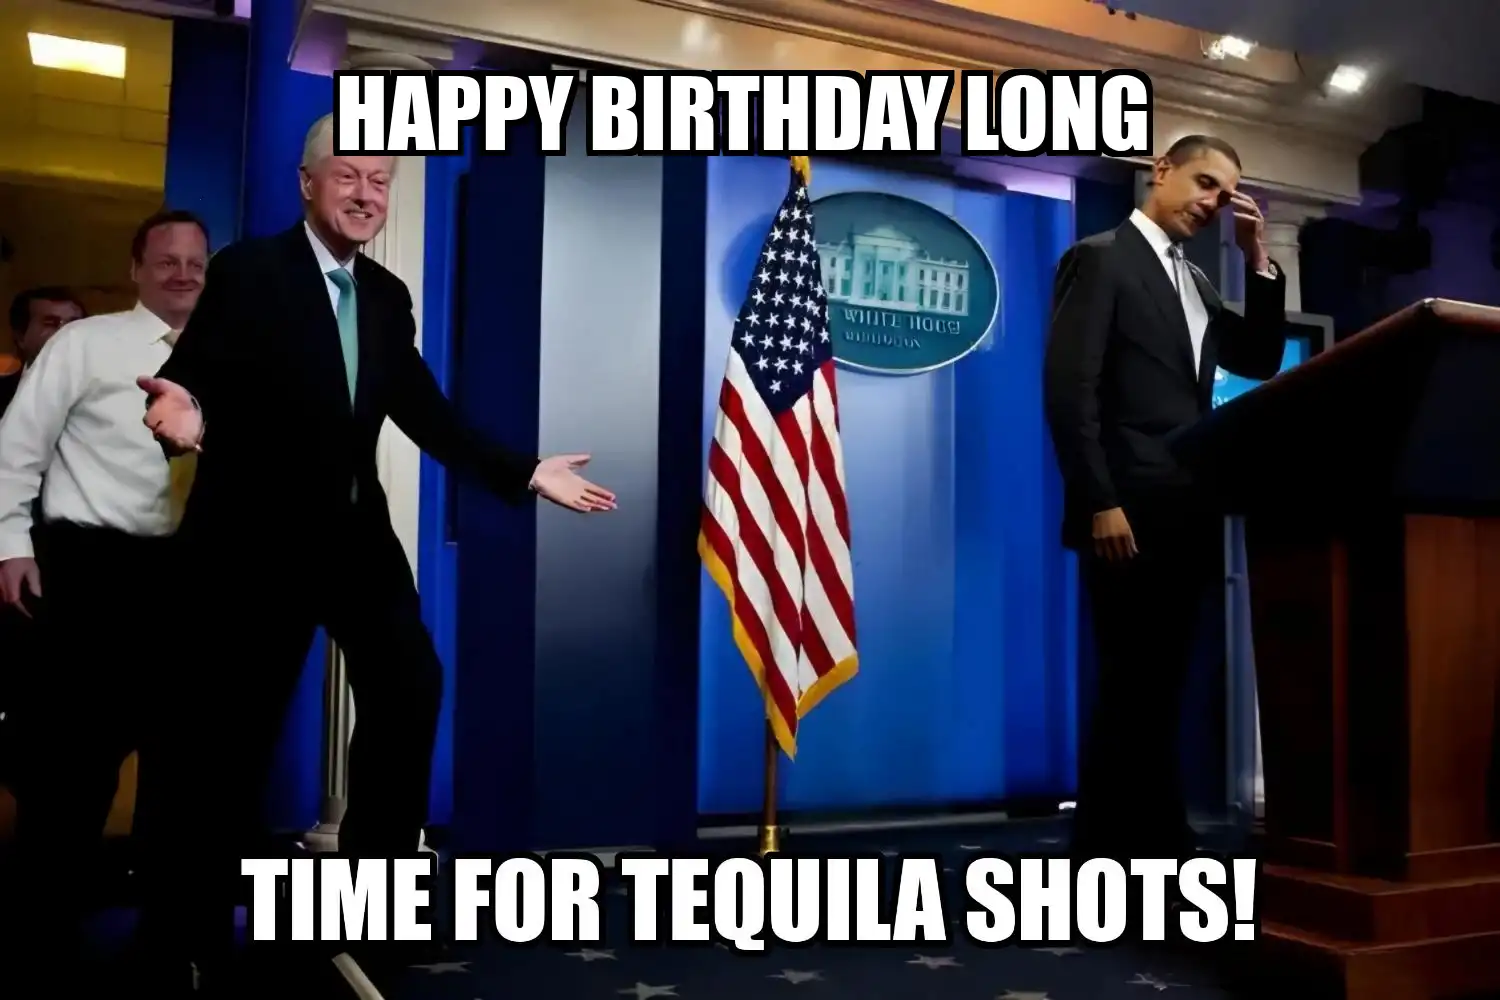 Happy Birthday Long Time For Tequila Shots Memes